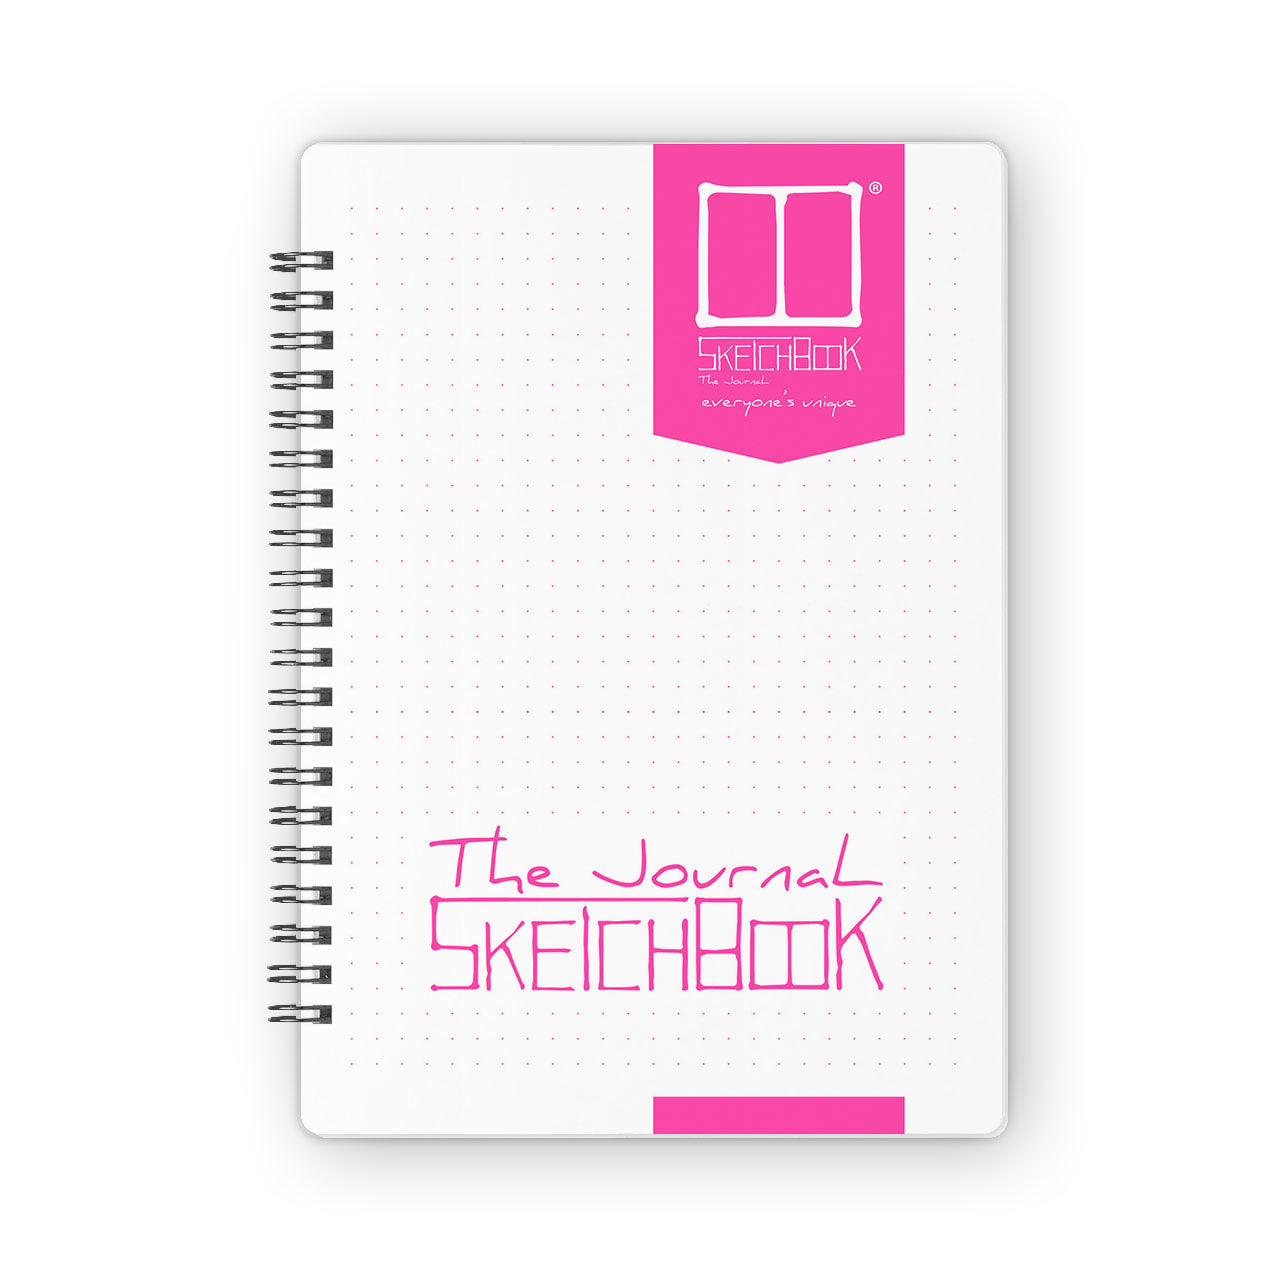 The Journal | 20 X 14 cm - Magenta - from SketchBook Stationery